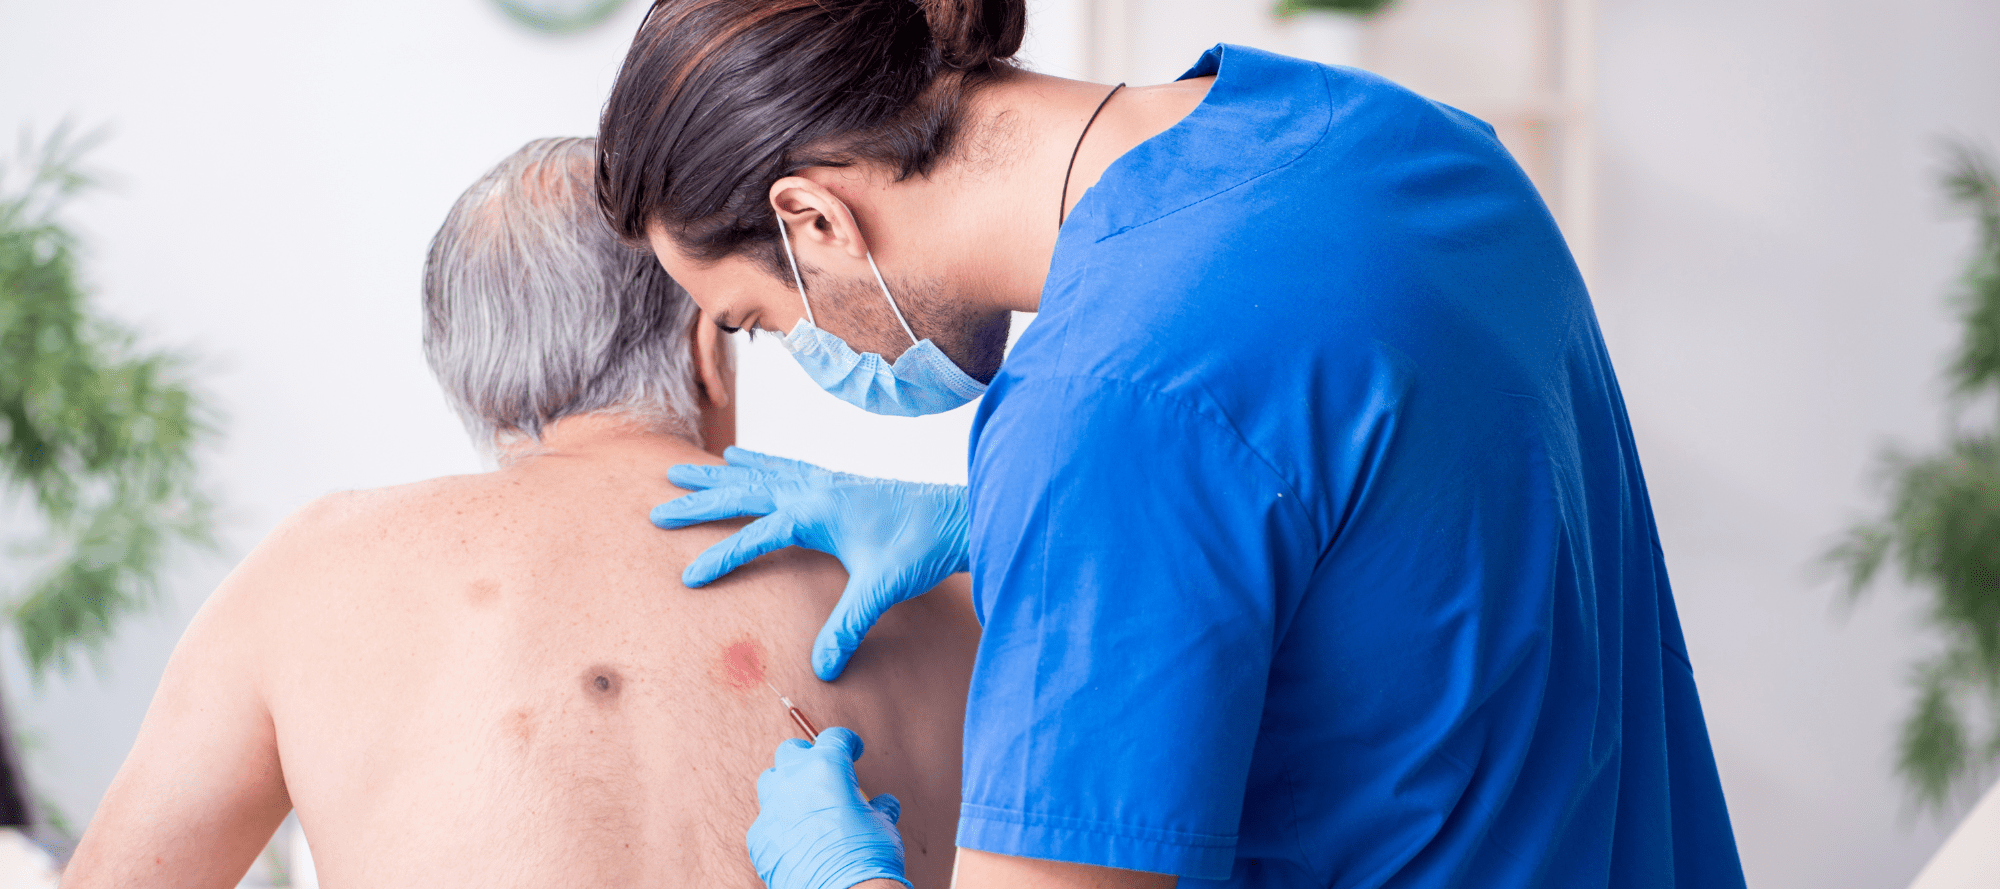 Mature man with red patches on back visiting a dermatologist that is inspecting skin